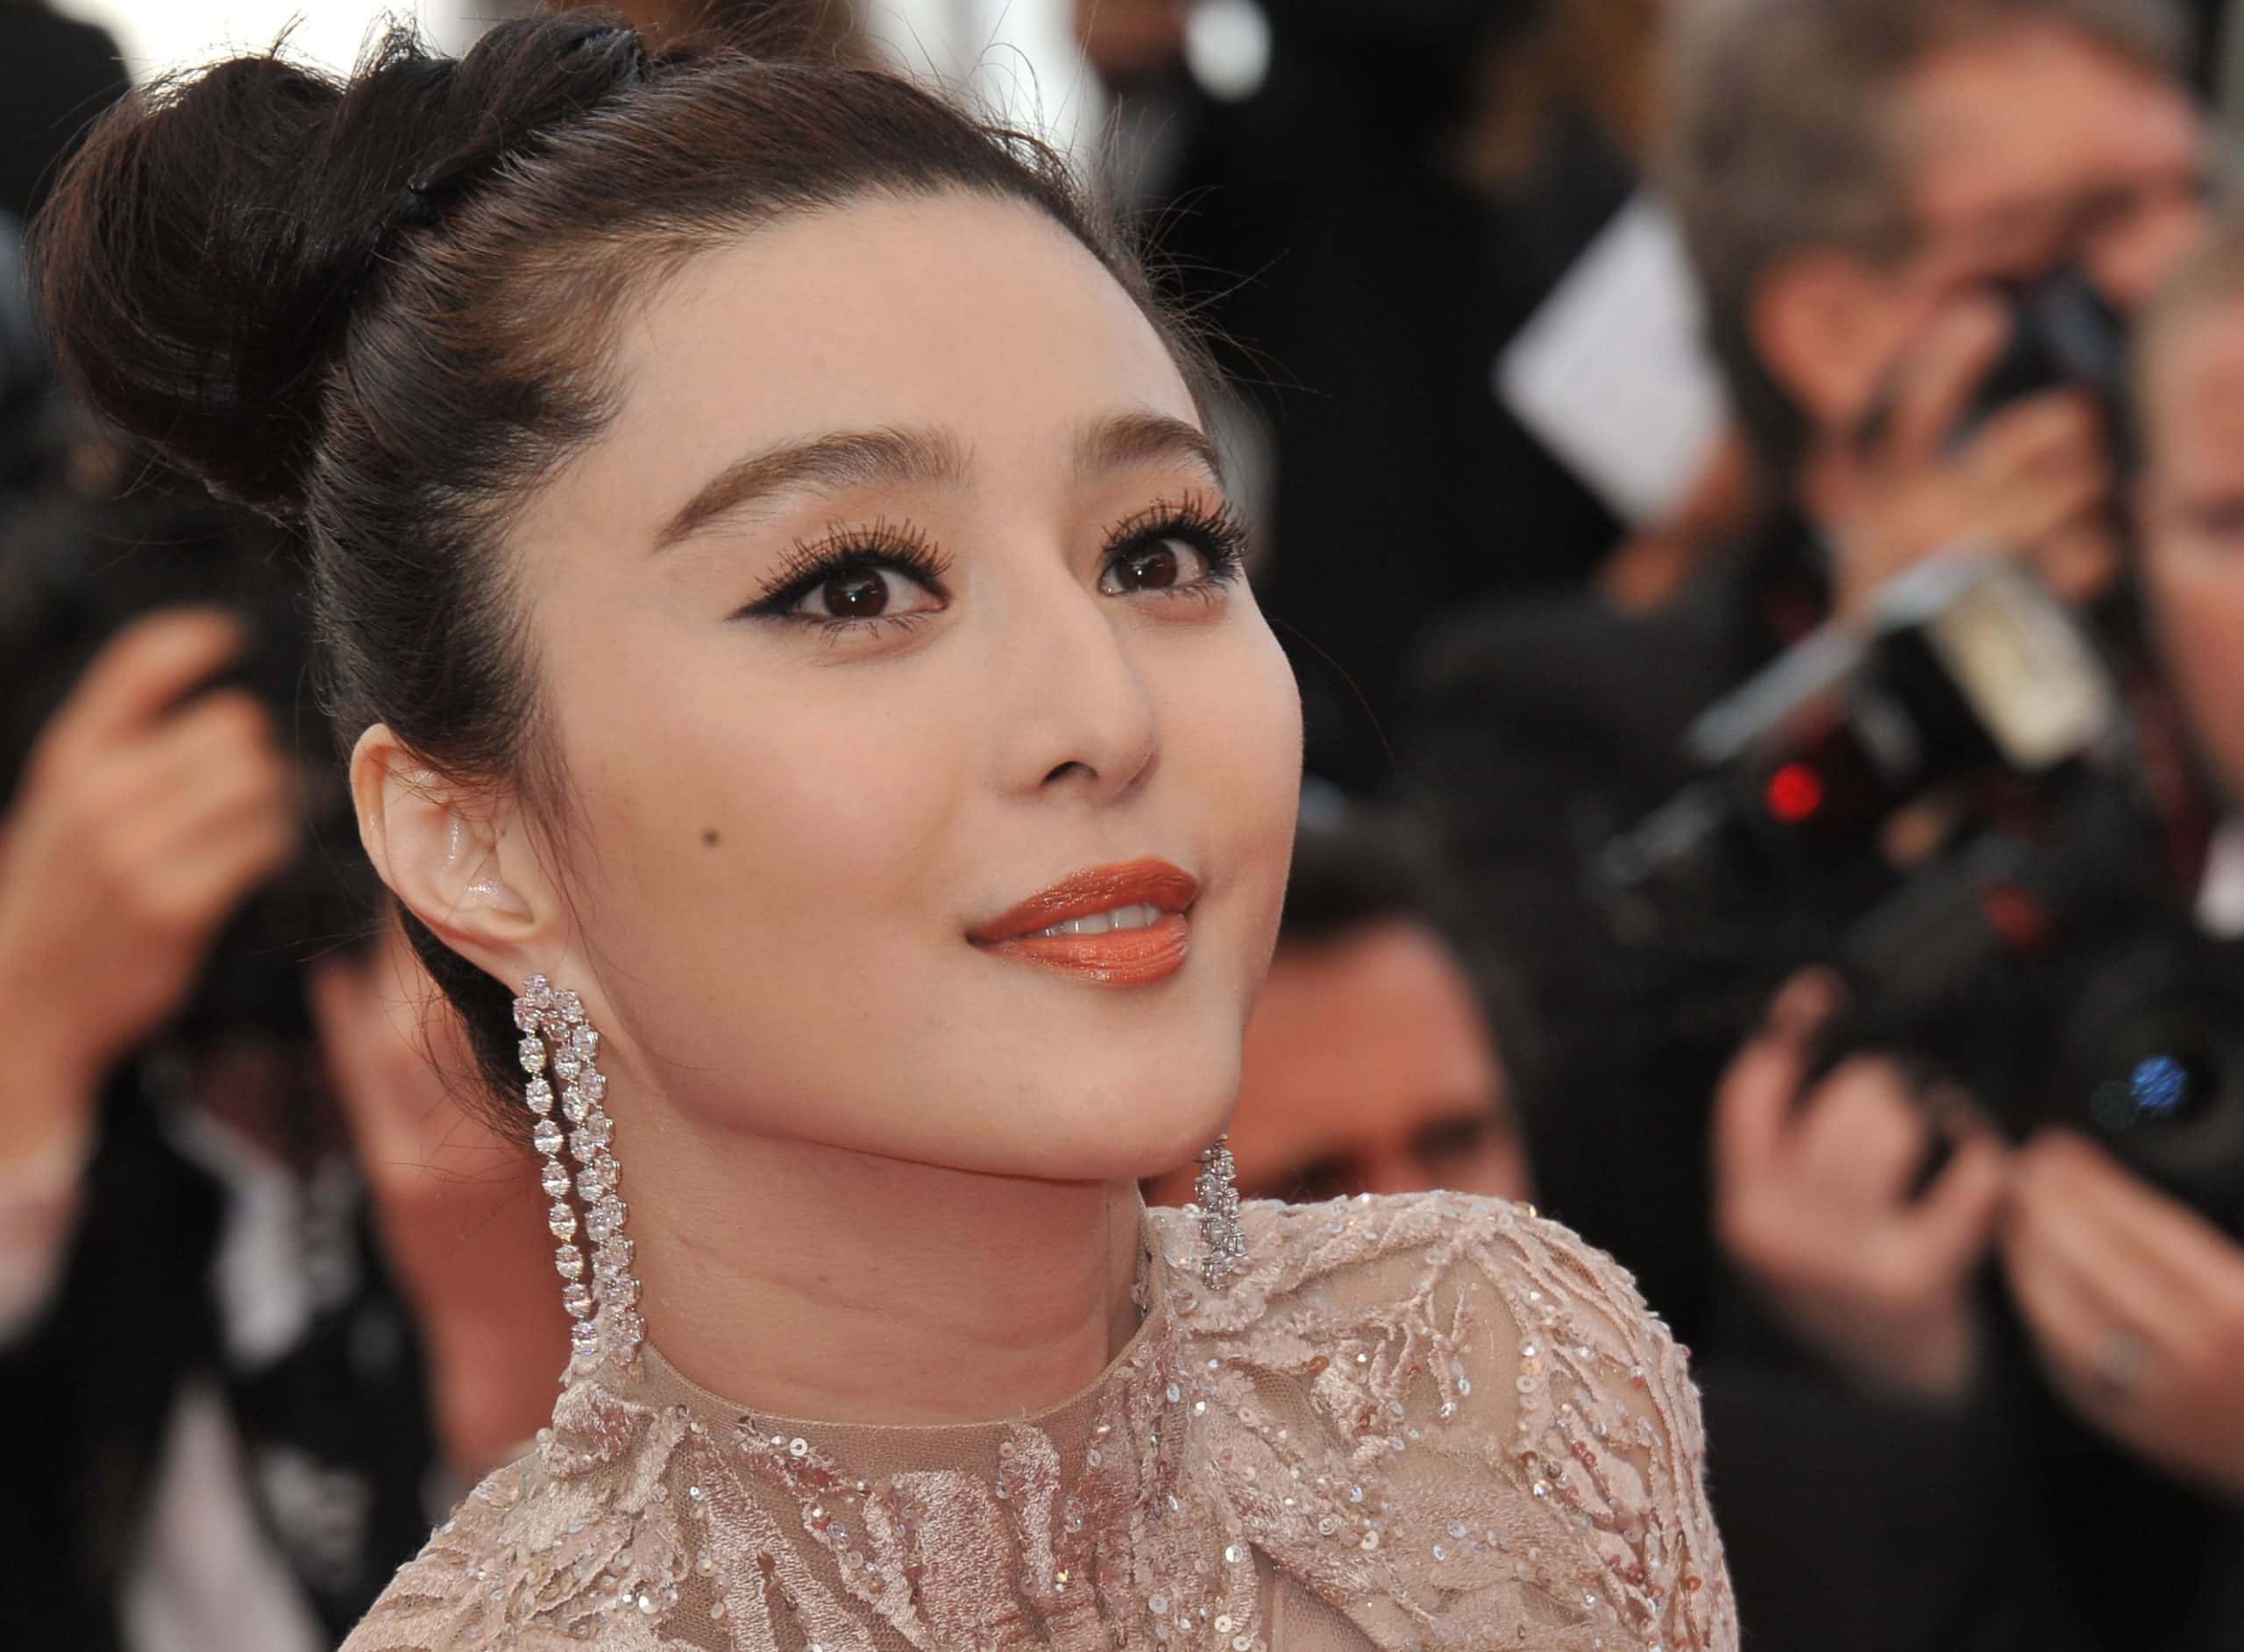 Evasive Facts About Fan Bingbing, China's Fashionable Superstar